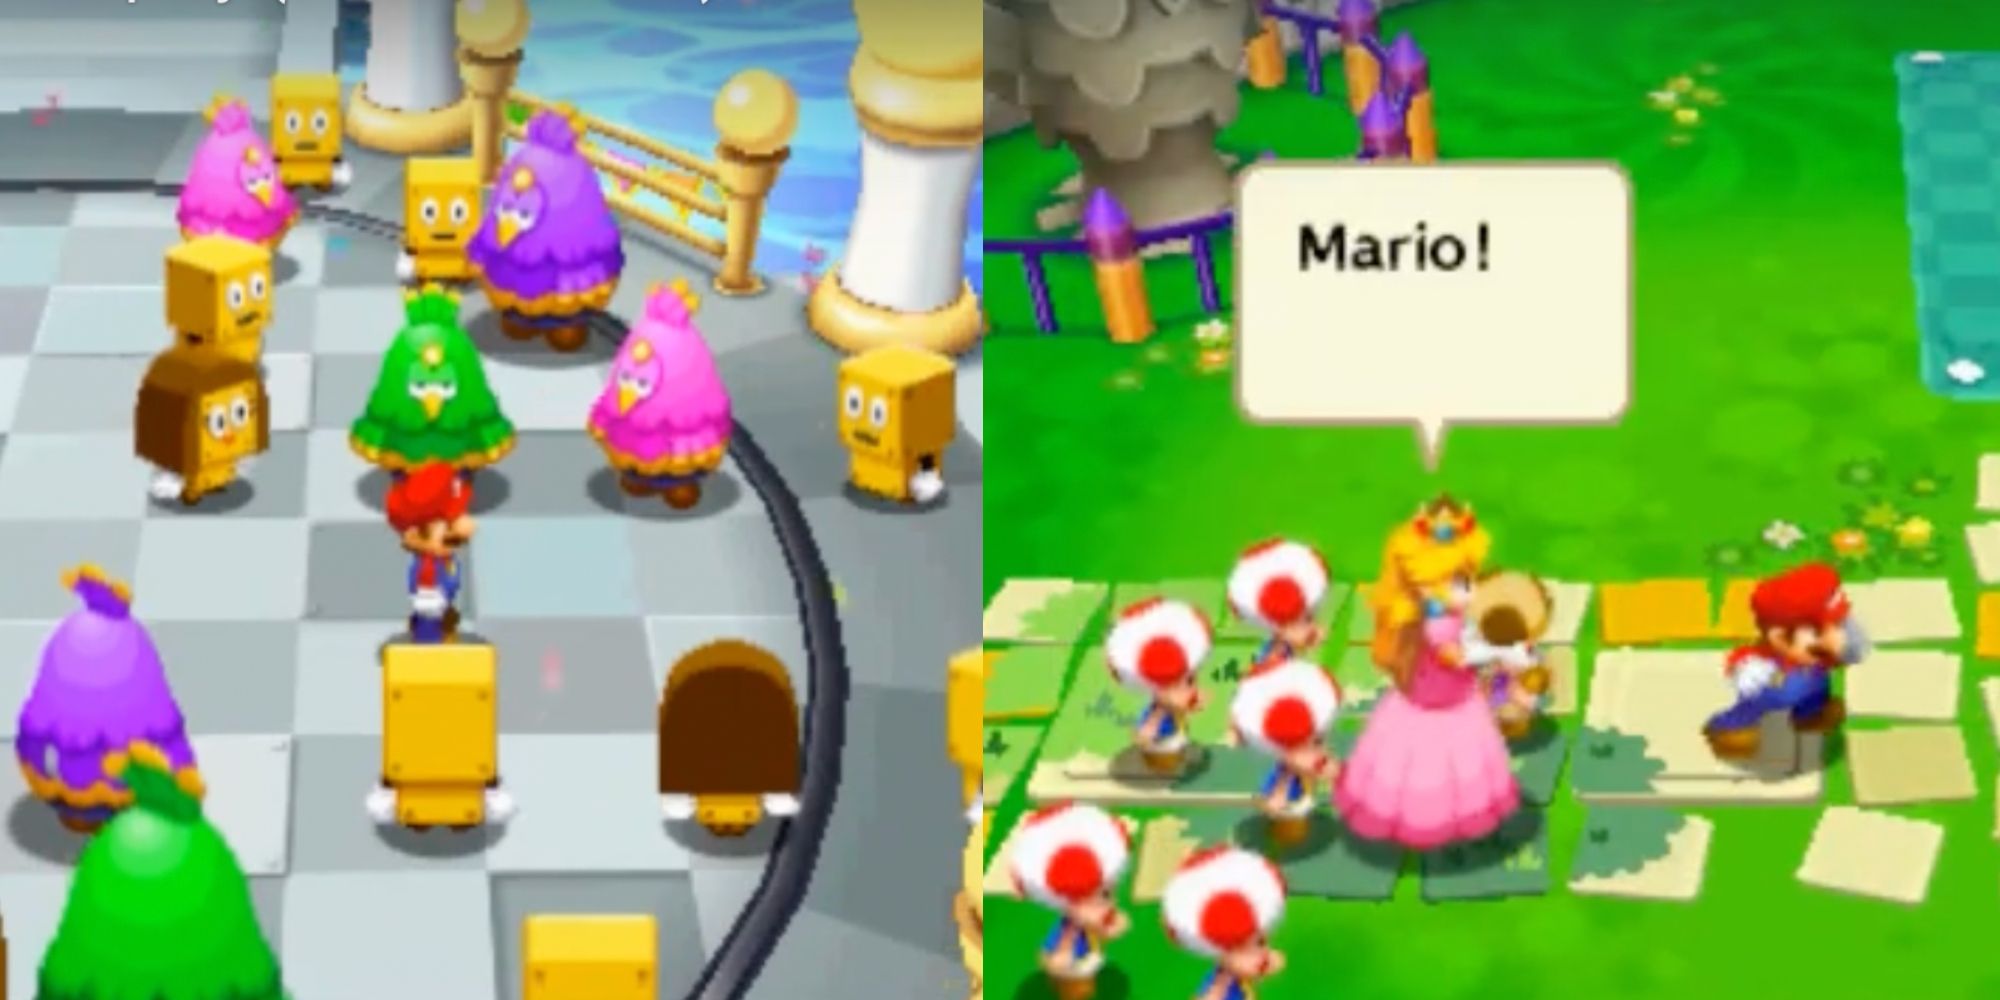 Mario and Peach surrounded by Toads as Peach calls Mario’s name